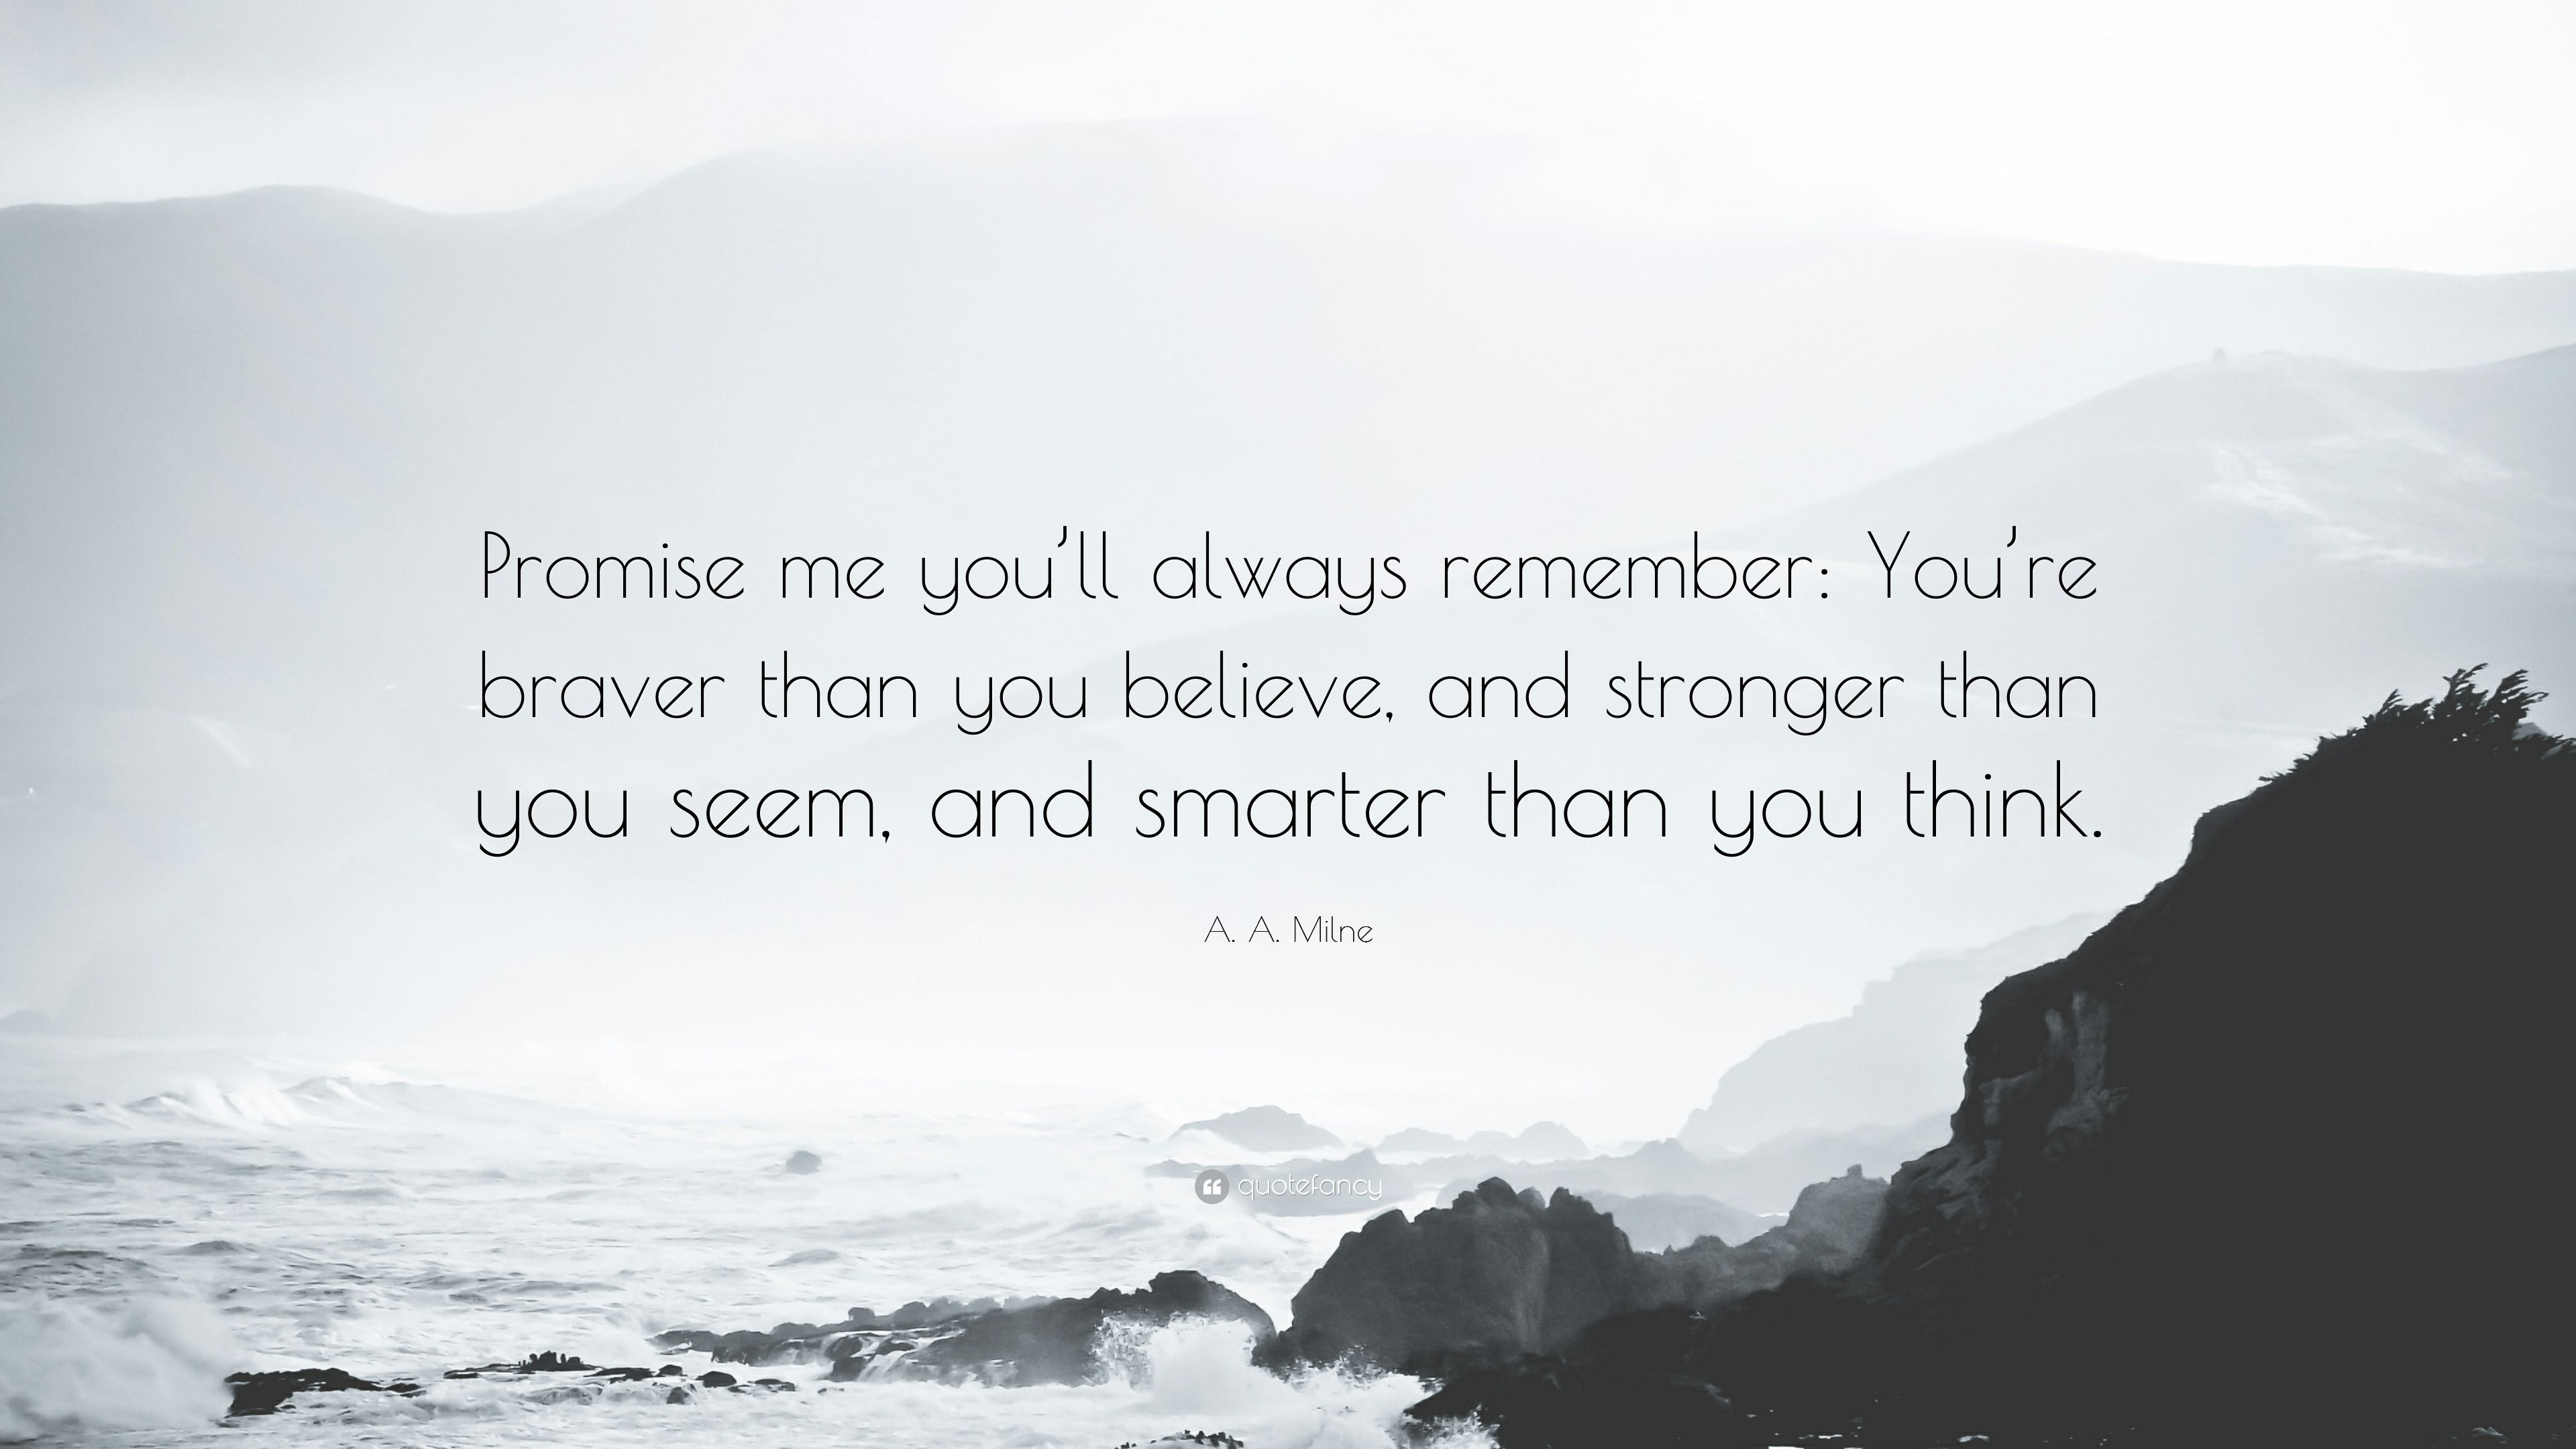 A. A. Milne Quote: “Promise me you'll .quotefancy.com